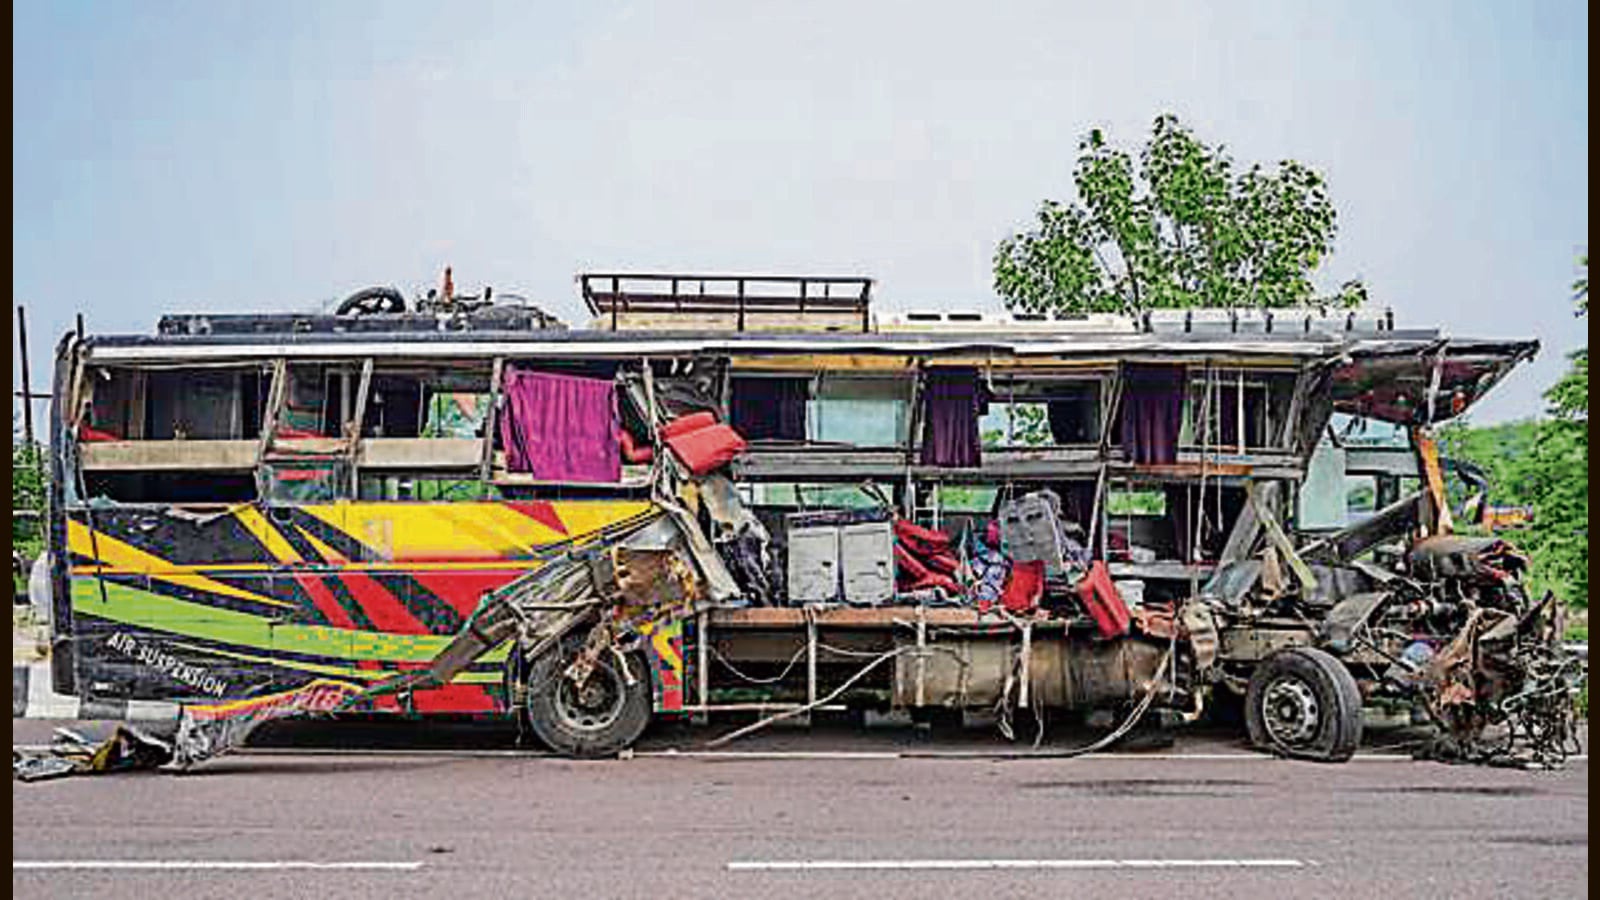 One-fourth buses unfit, scrap them if owners fail to make amends: UP CS